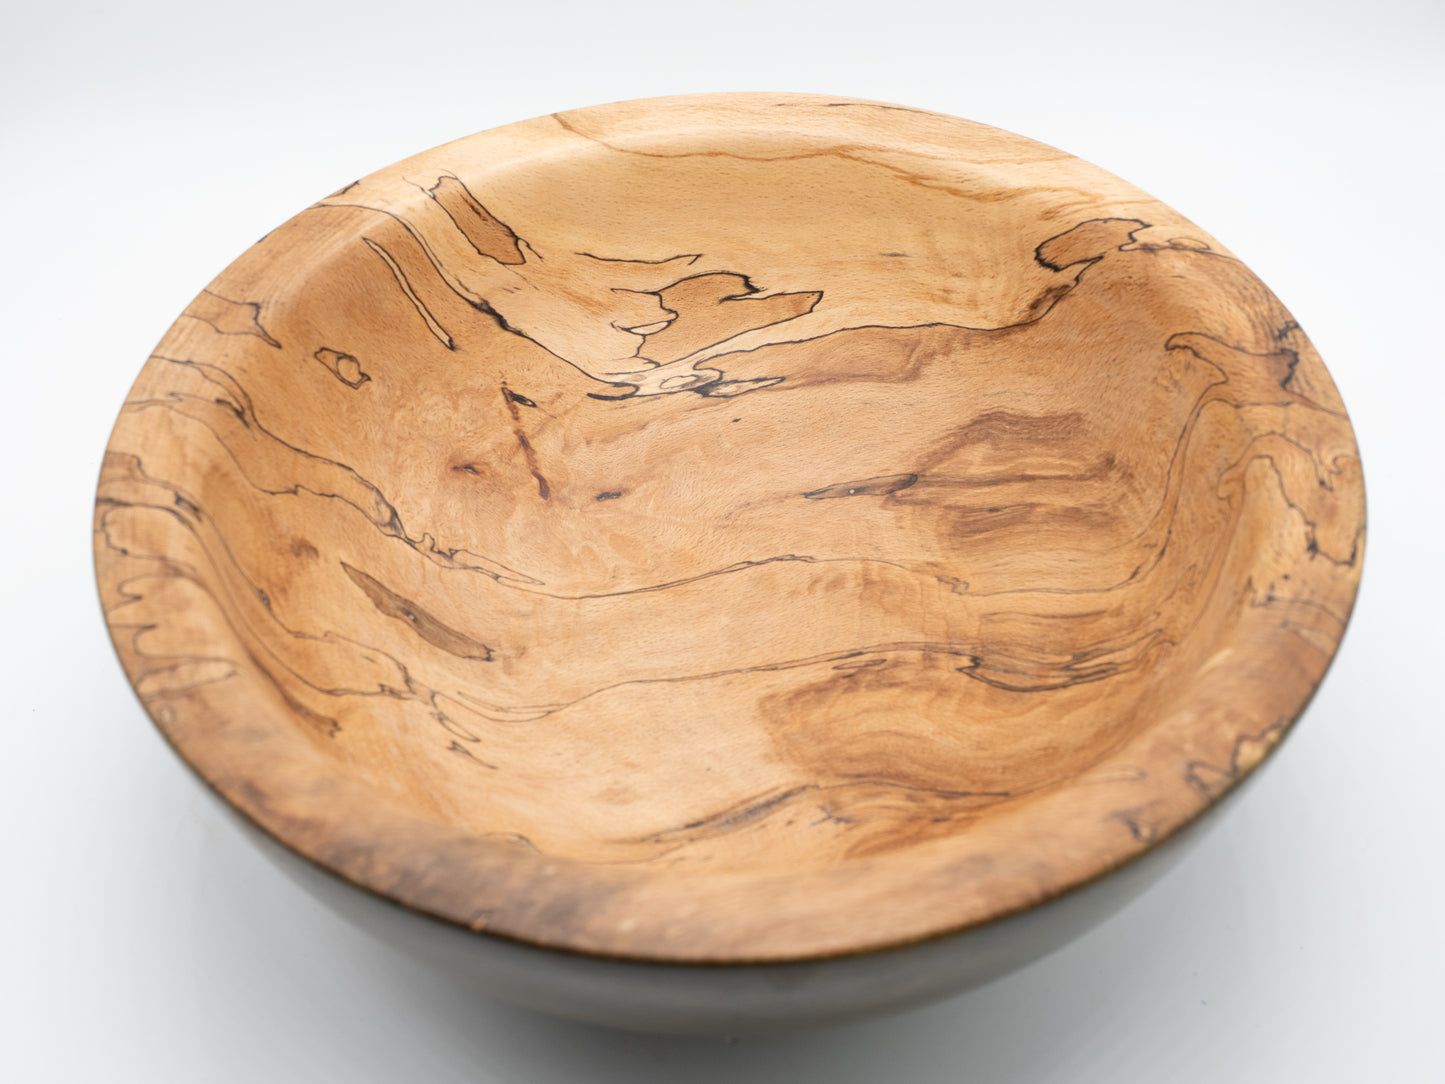 Beautiful Wooden SPALTED OAK Bowl Coloured in Greens & Yellow - Handmade, Wood Turned and Very Unique